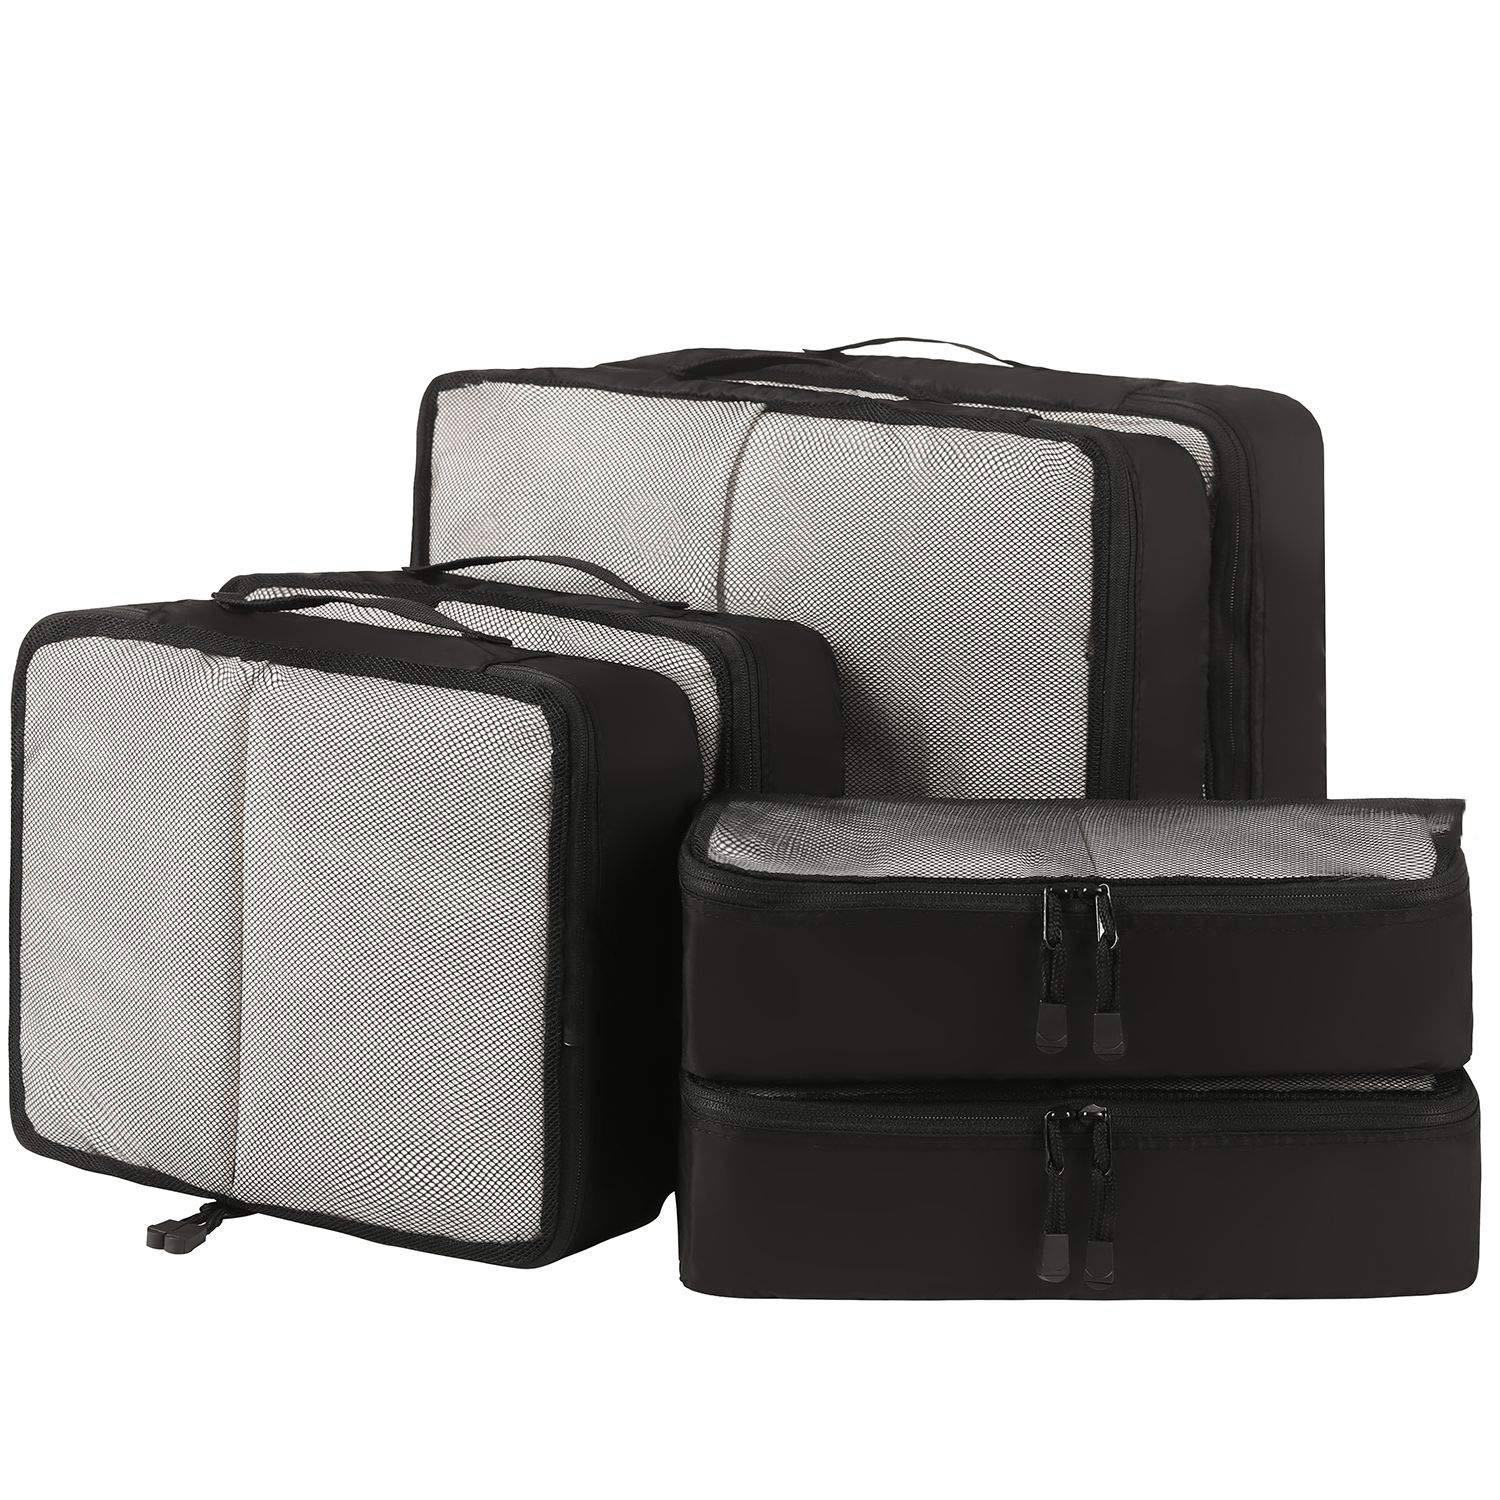 6 Set Packing Cubes Travel Luggage Bag Product Details